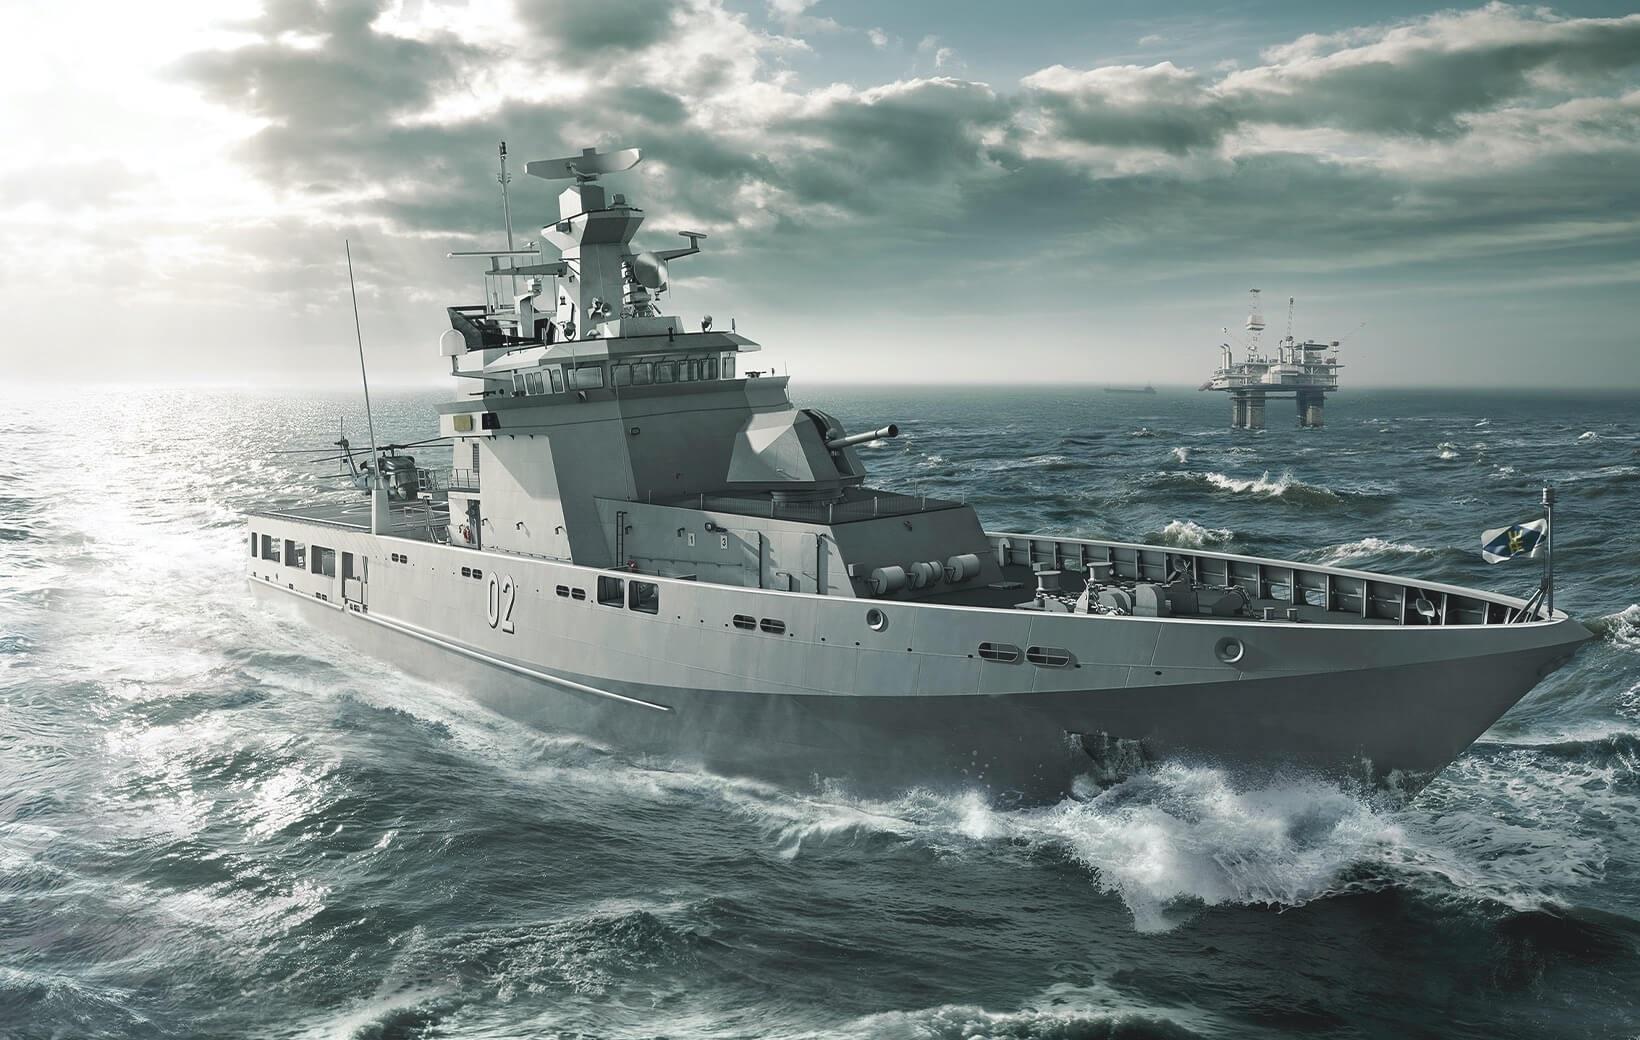 Germany's NVL Group Launches Construction of First New Bulgarian Multipurpose Modular Patrol Vessels